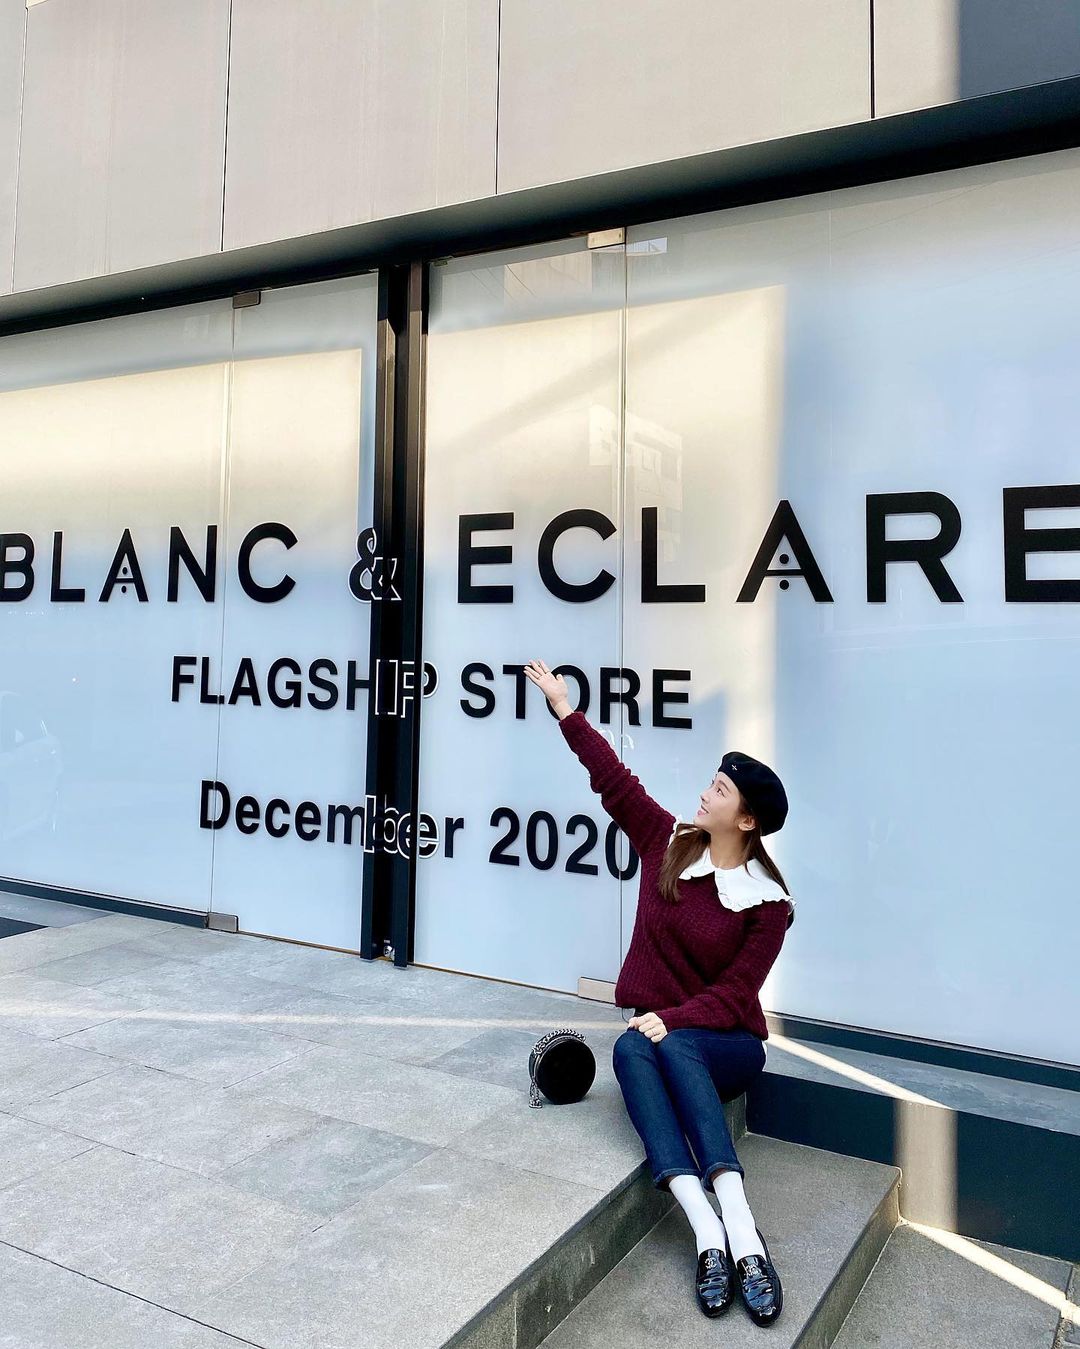 Jessica's 'BLANC & ECLARE' will open its flagship store in